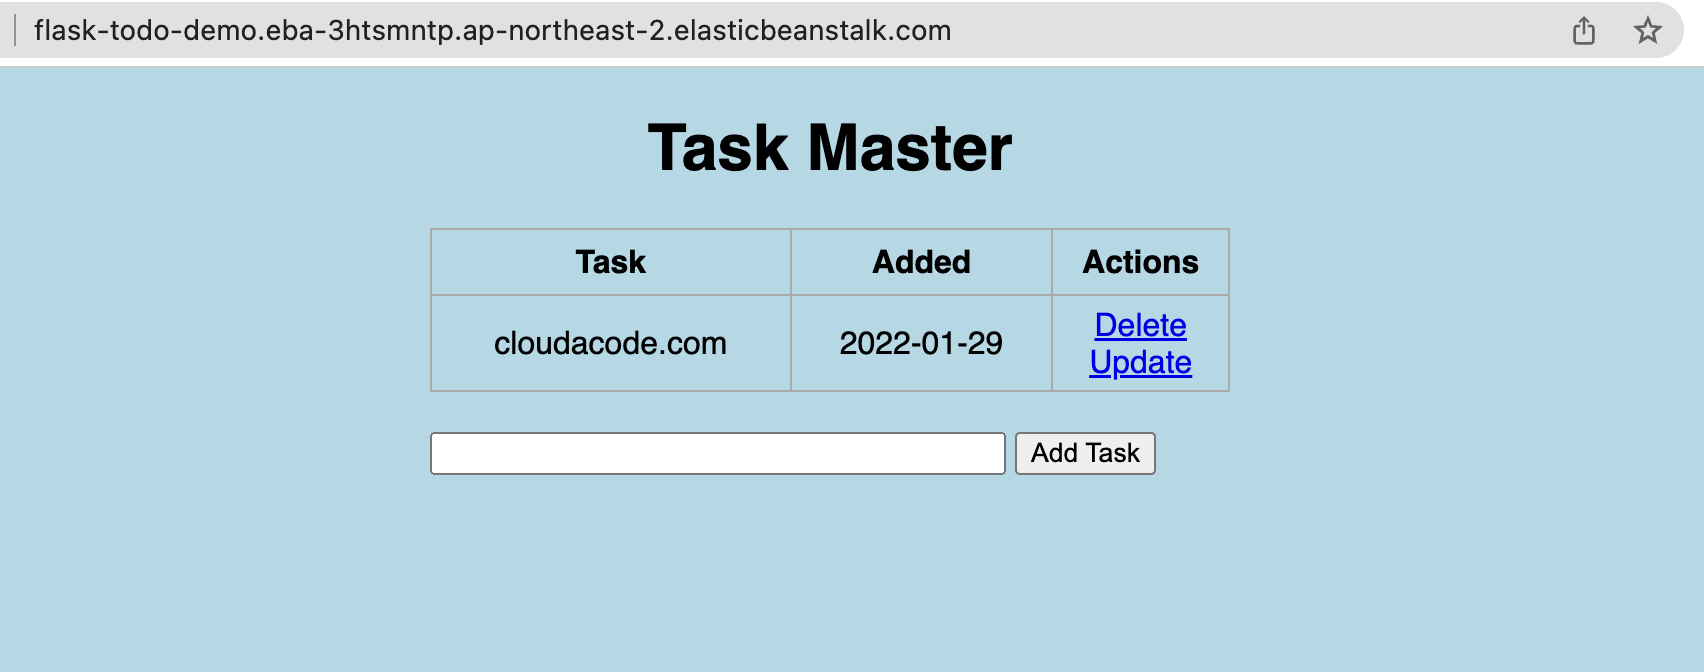 eb-flask-todo-demo-webpage-updated